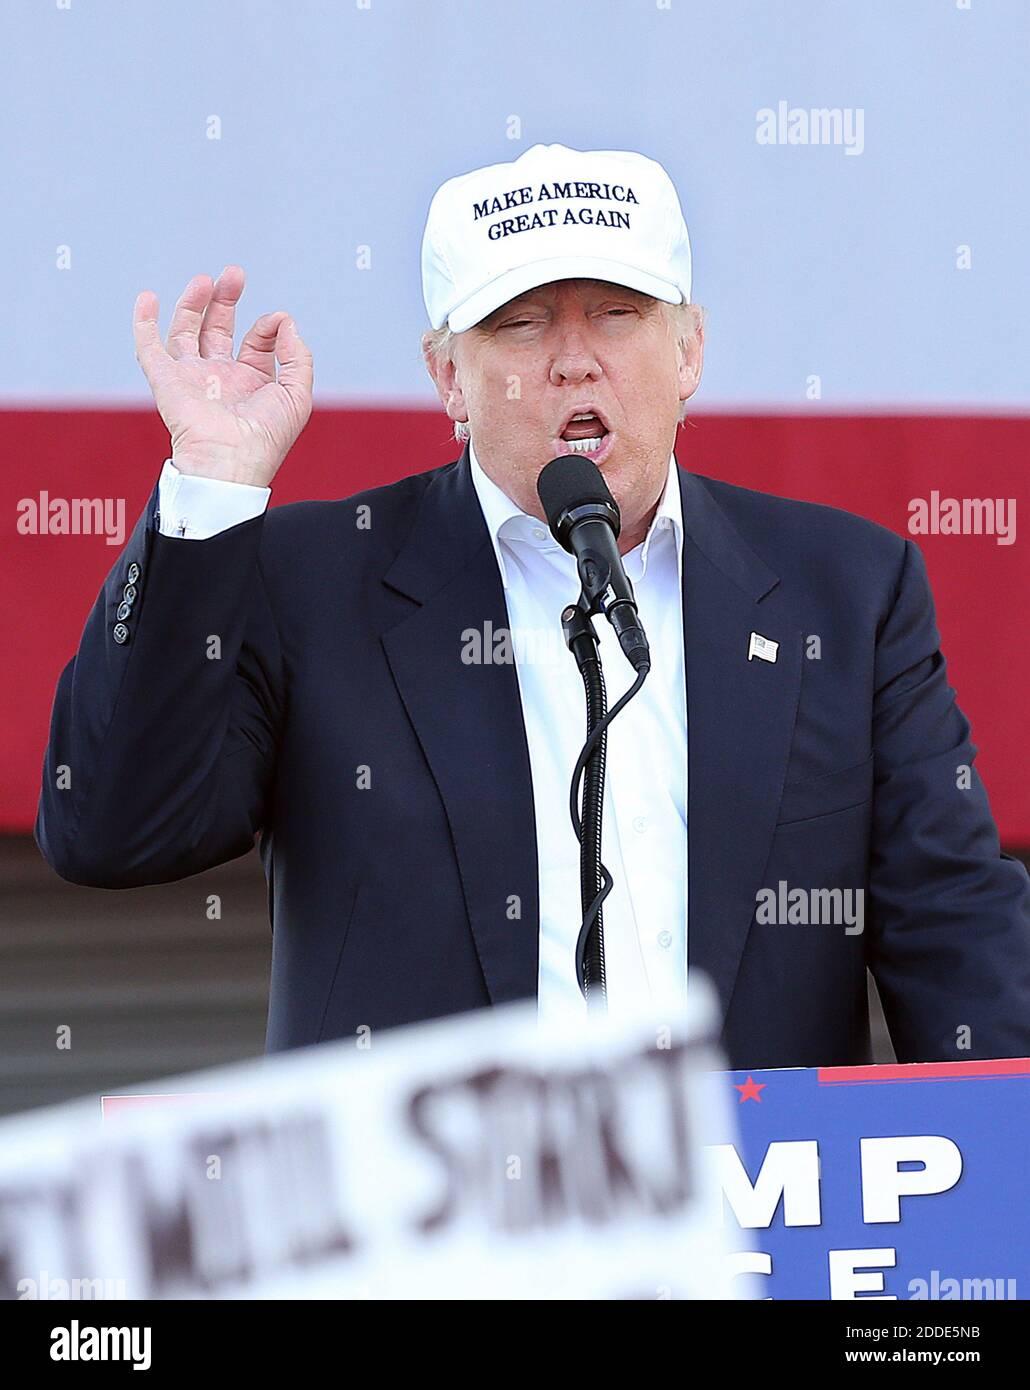 NO FILM, NO VIDEO, NO TV, NO DOCUMENTARY - Republican presidential candidate Donald J. Trump speaks during a campaign rally at Bayfront Park Amphitheater Wednesday November 02, 2016 in Miami, FL, USA. Photo by Pedro Portal/Miami Herald/TNS/ABACAPRESS.COM Stock Photo